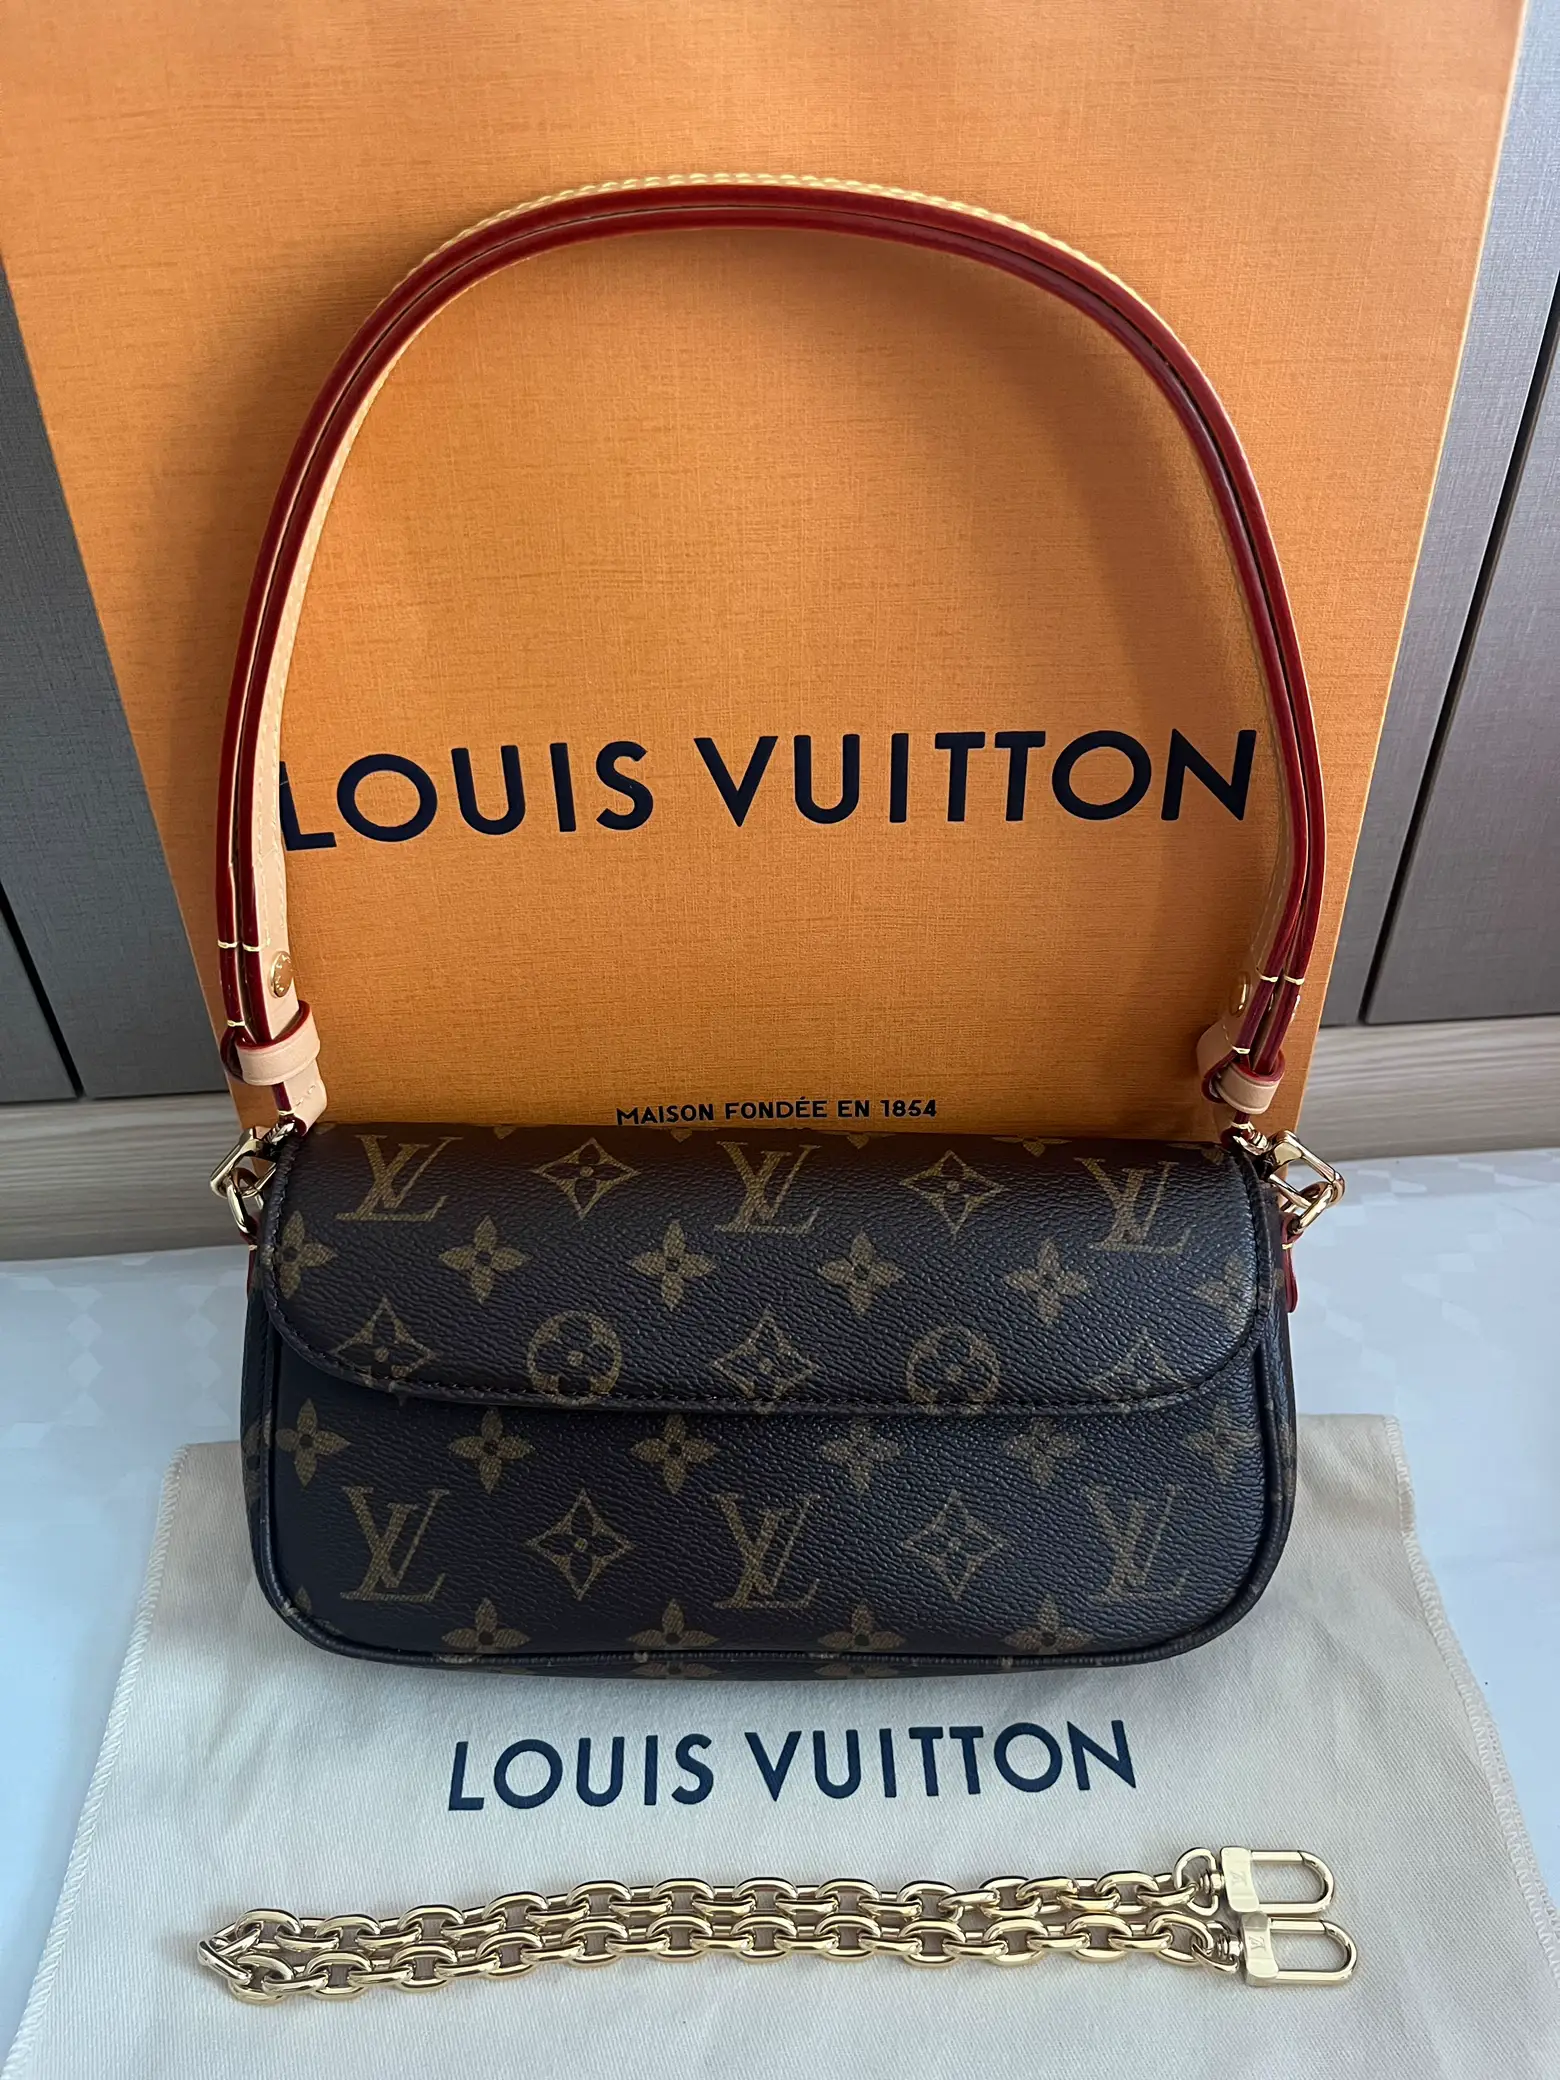 WHAT'S IN MY BAG? WHAT FITS?, Louis Vuitton PALLAS CHAIN